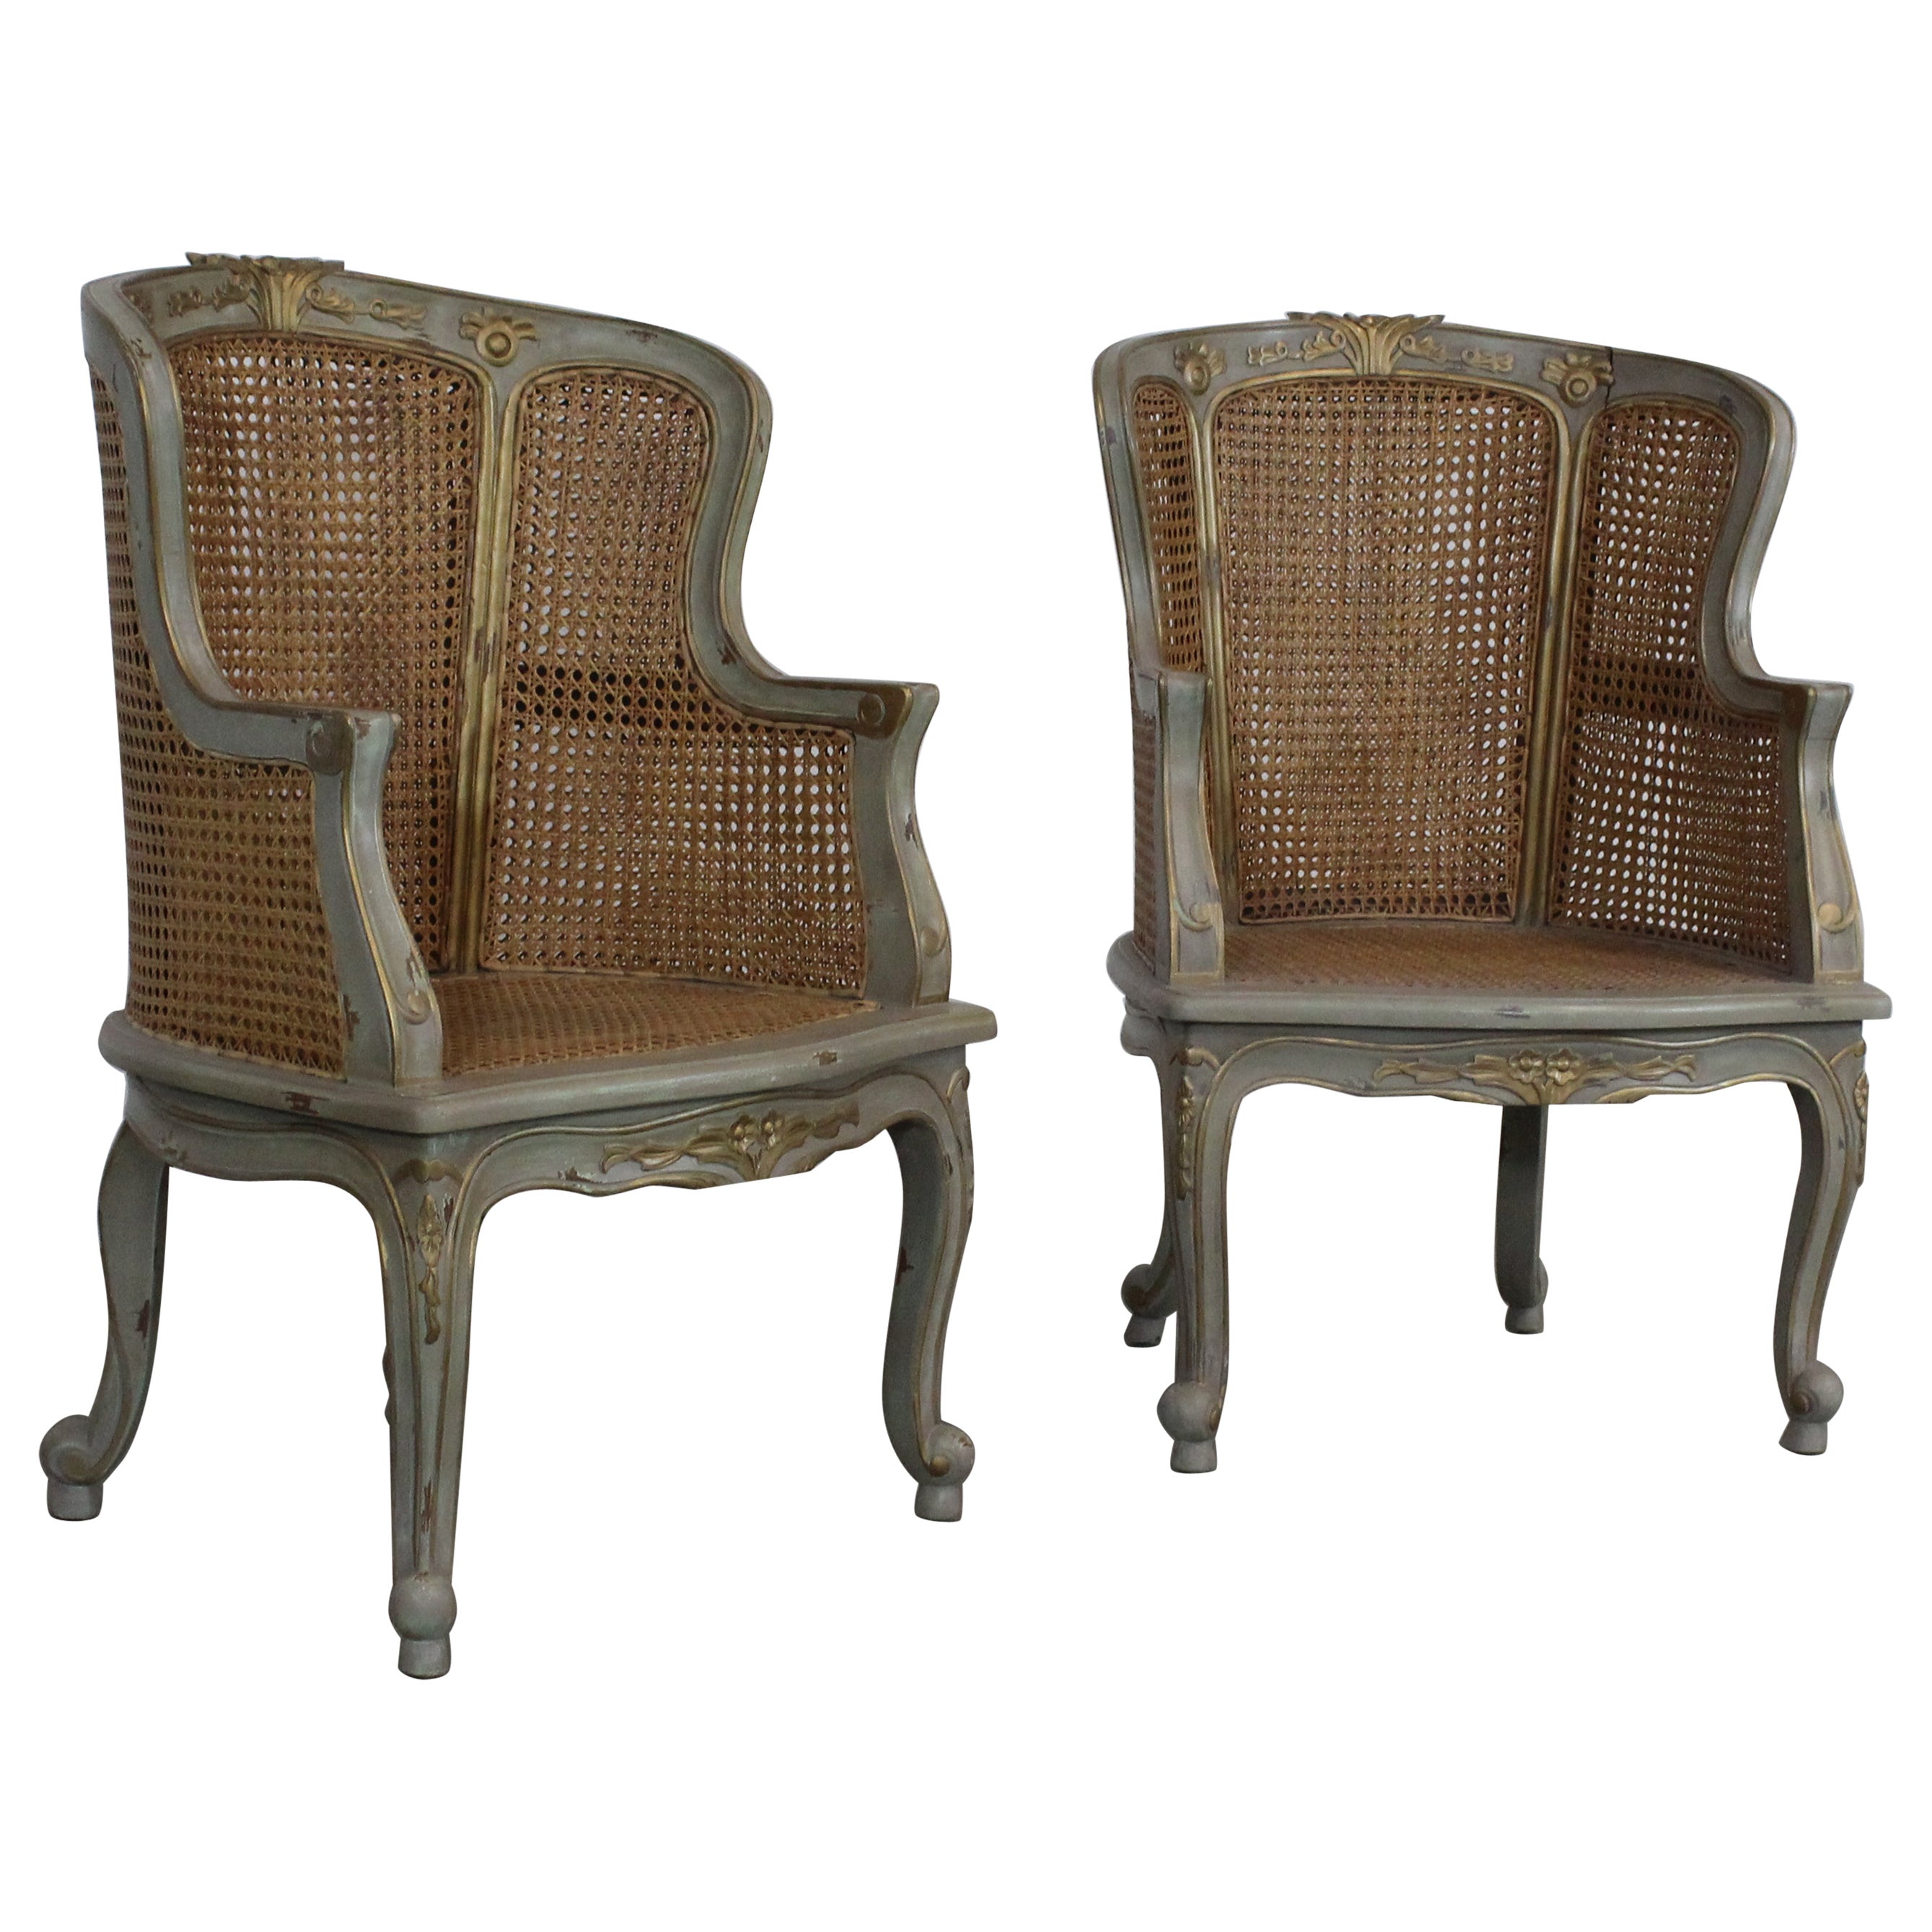 Pair of Country French Caned Arm Chairs